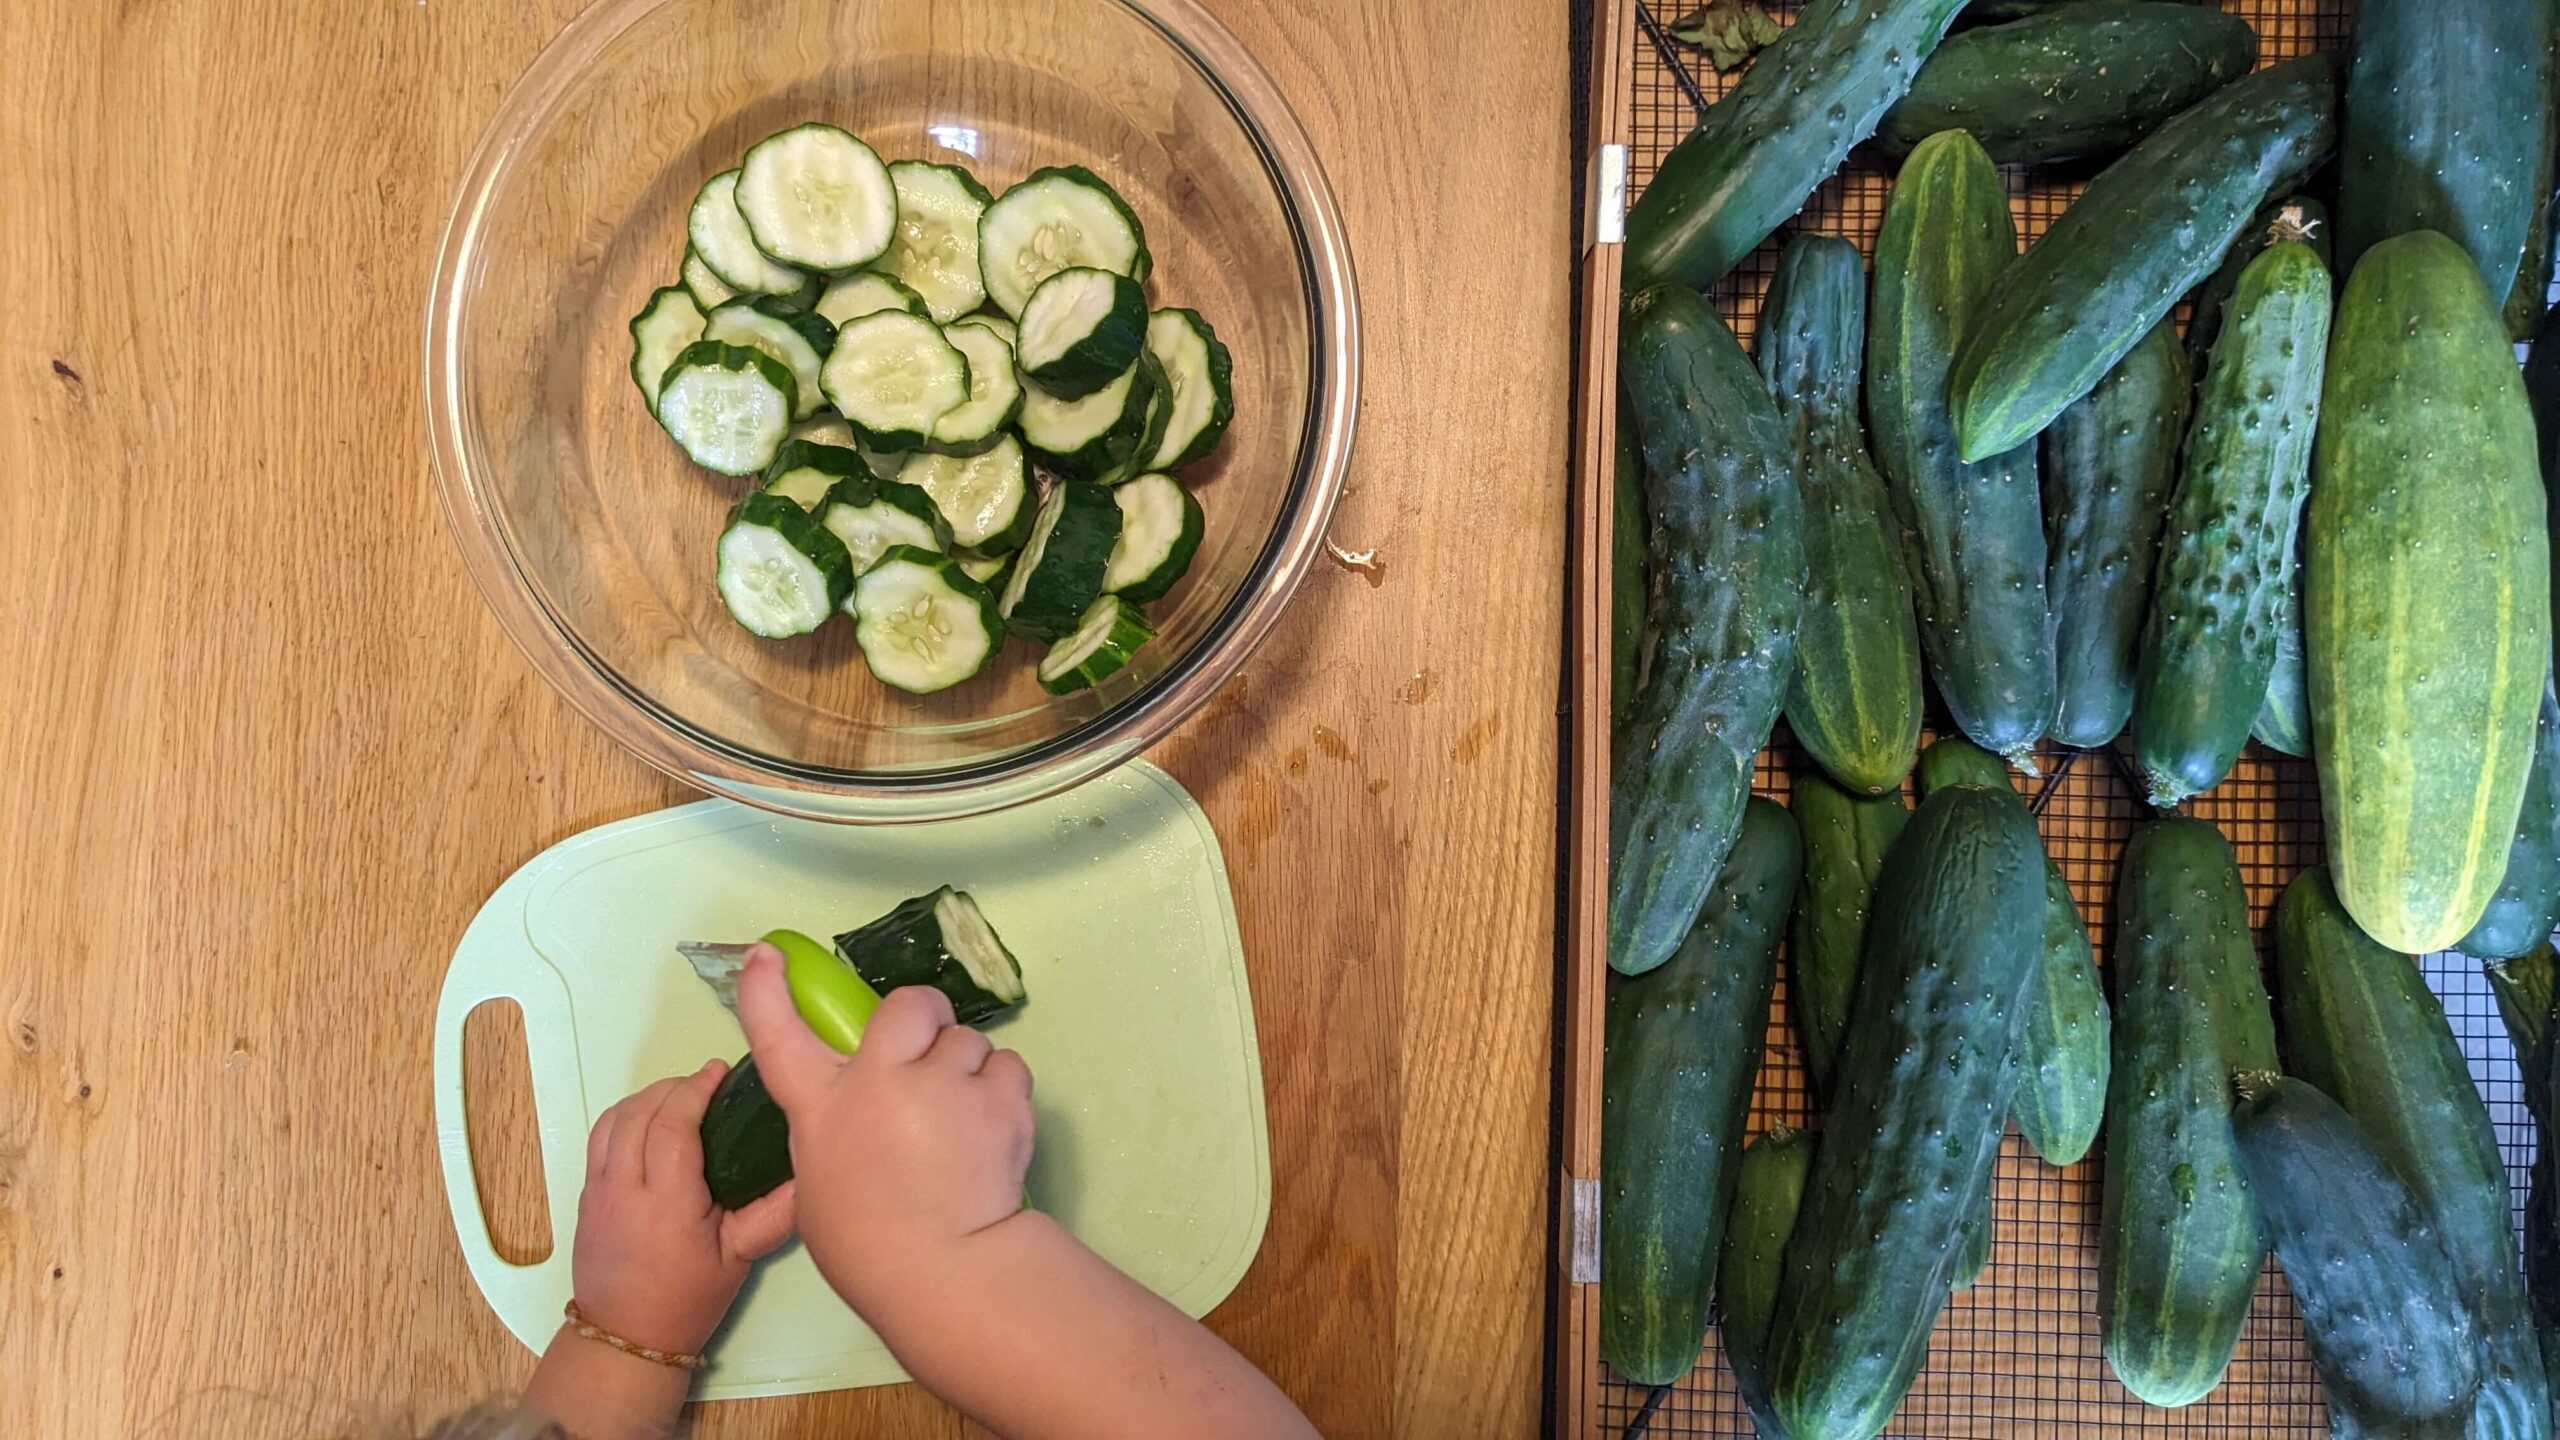 toddler cutting cucumbers next to a pile of cucumbers